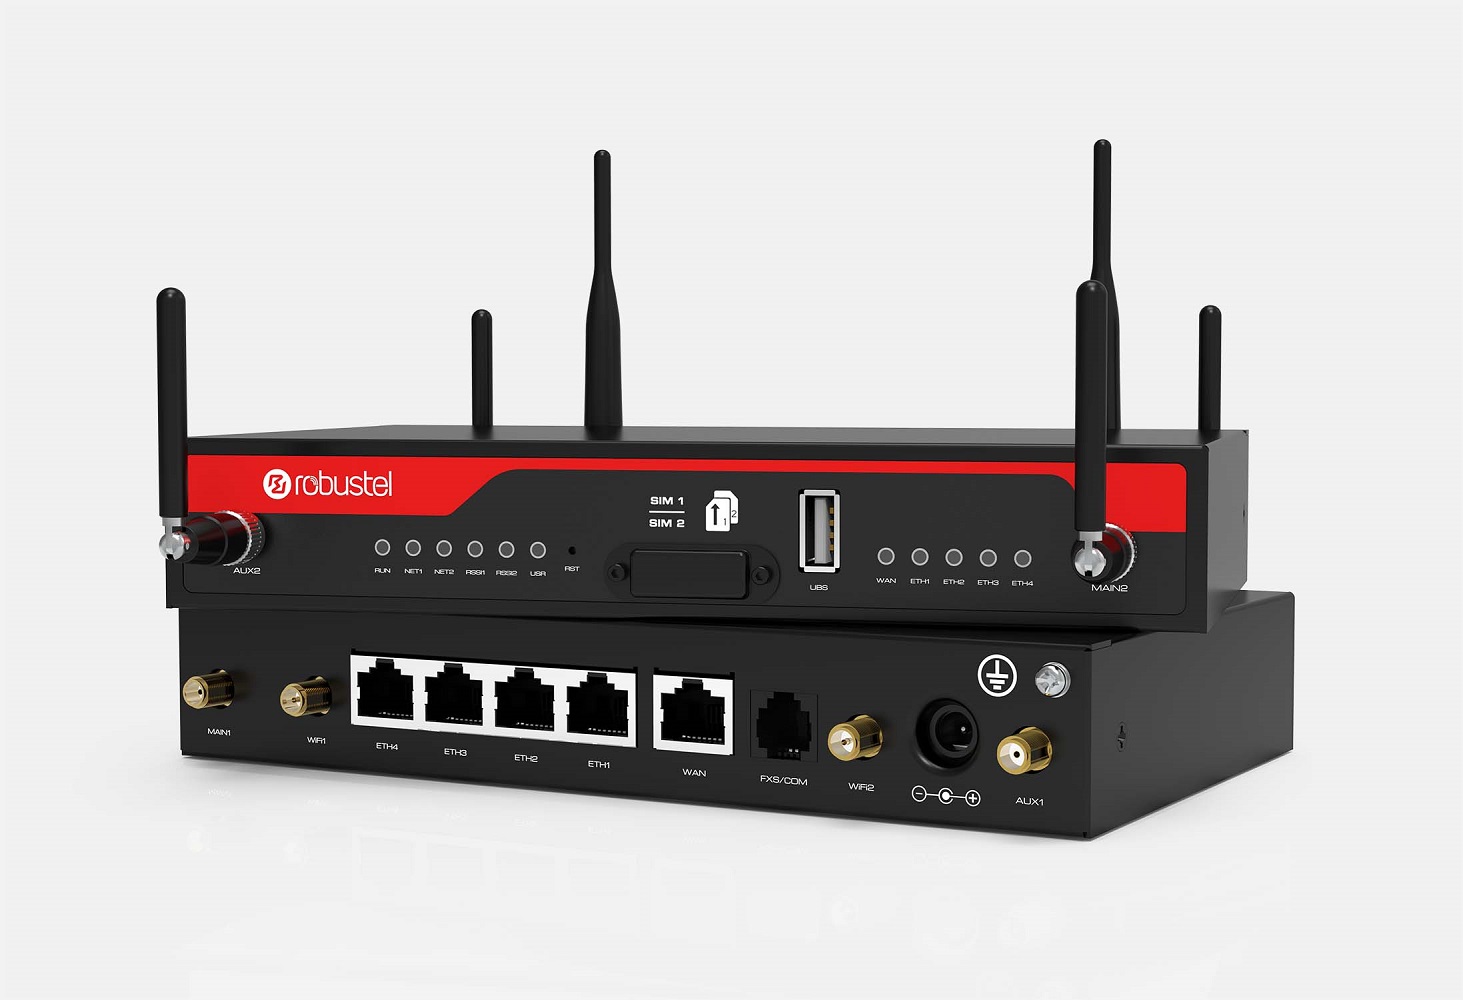 Robustel R2000 Ent Industrial Dual Module Cellular VPN Router with Voice.